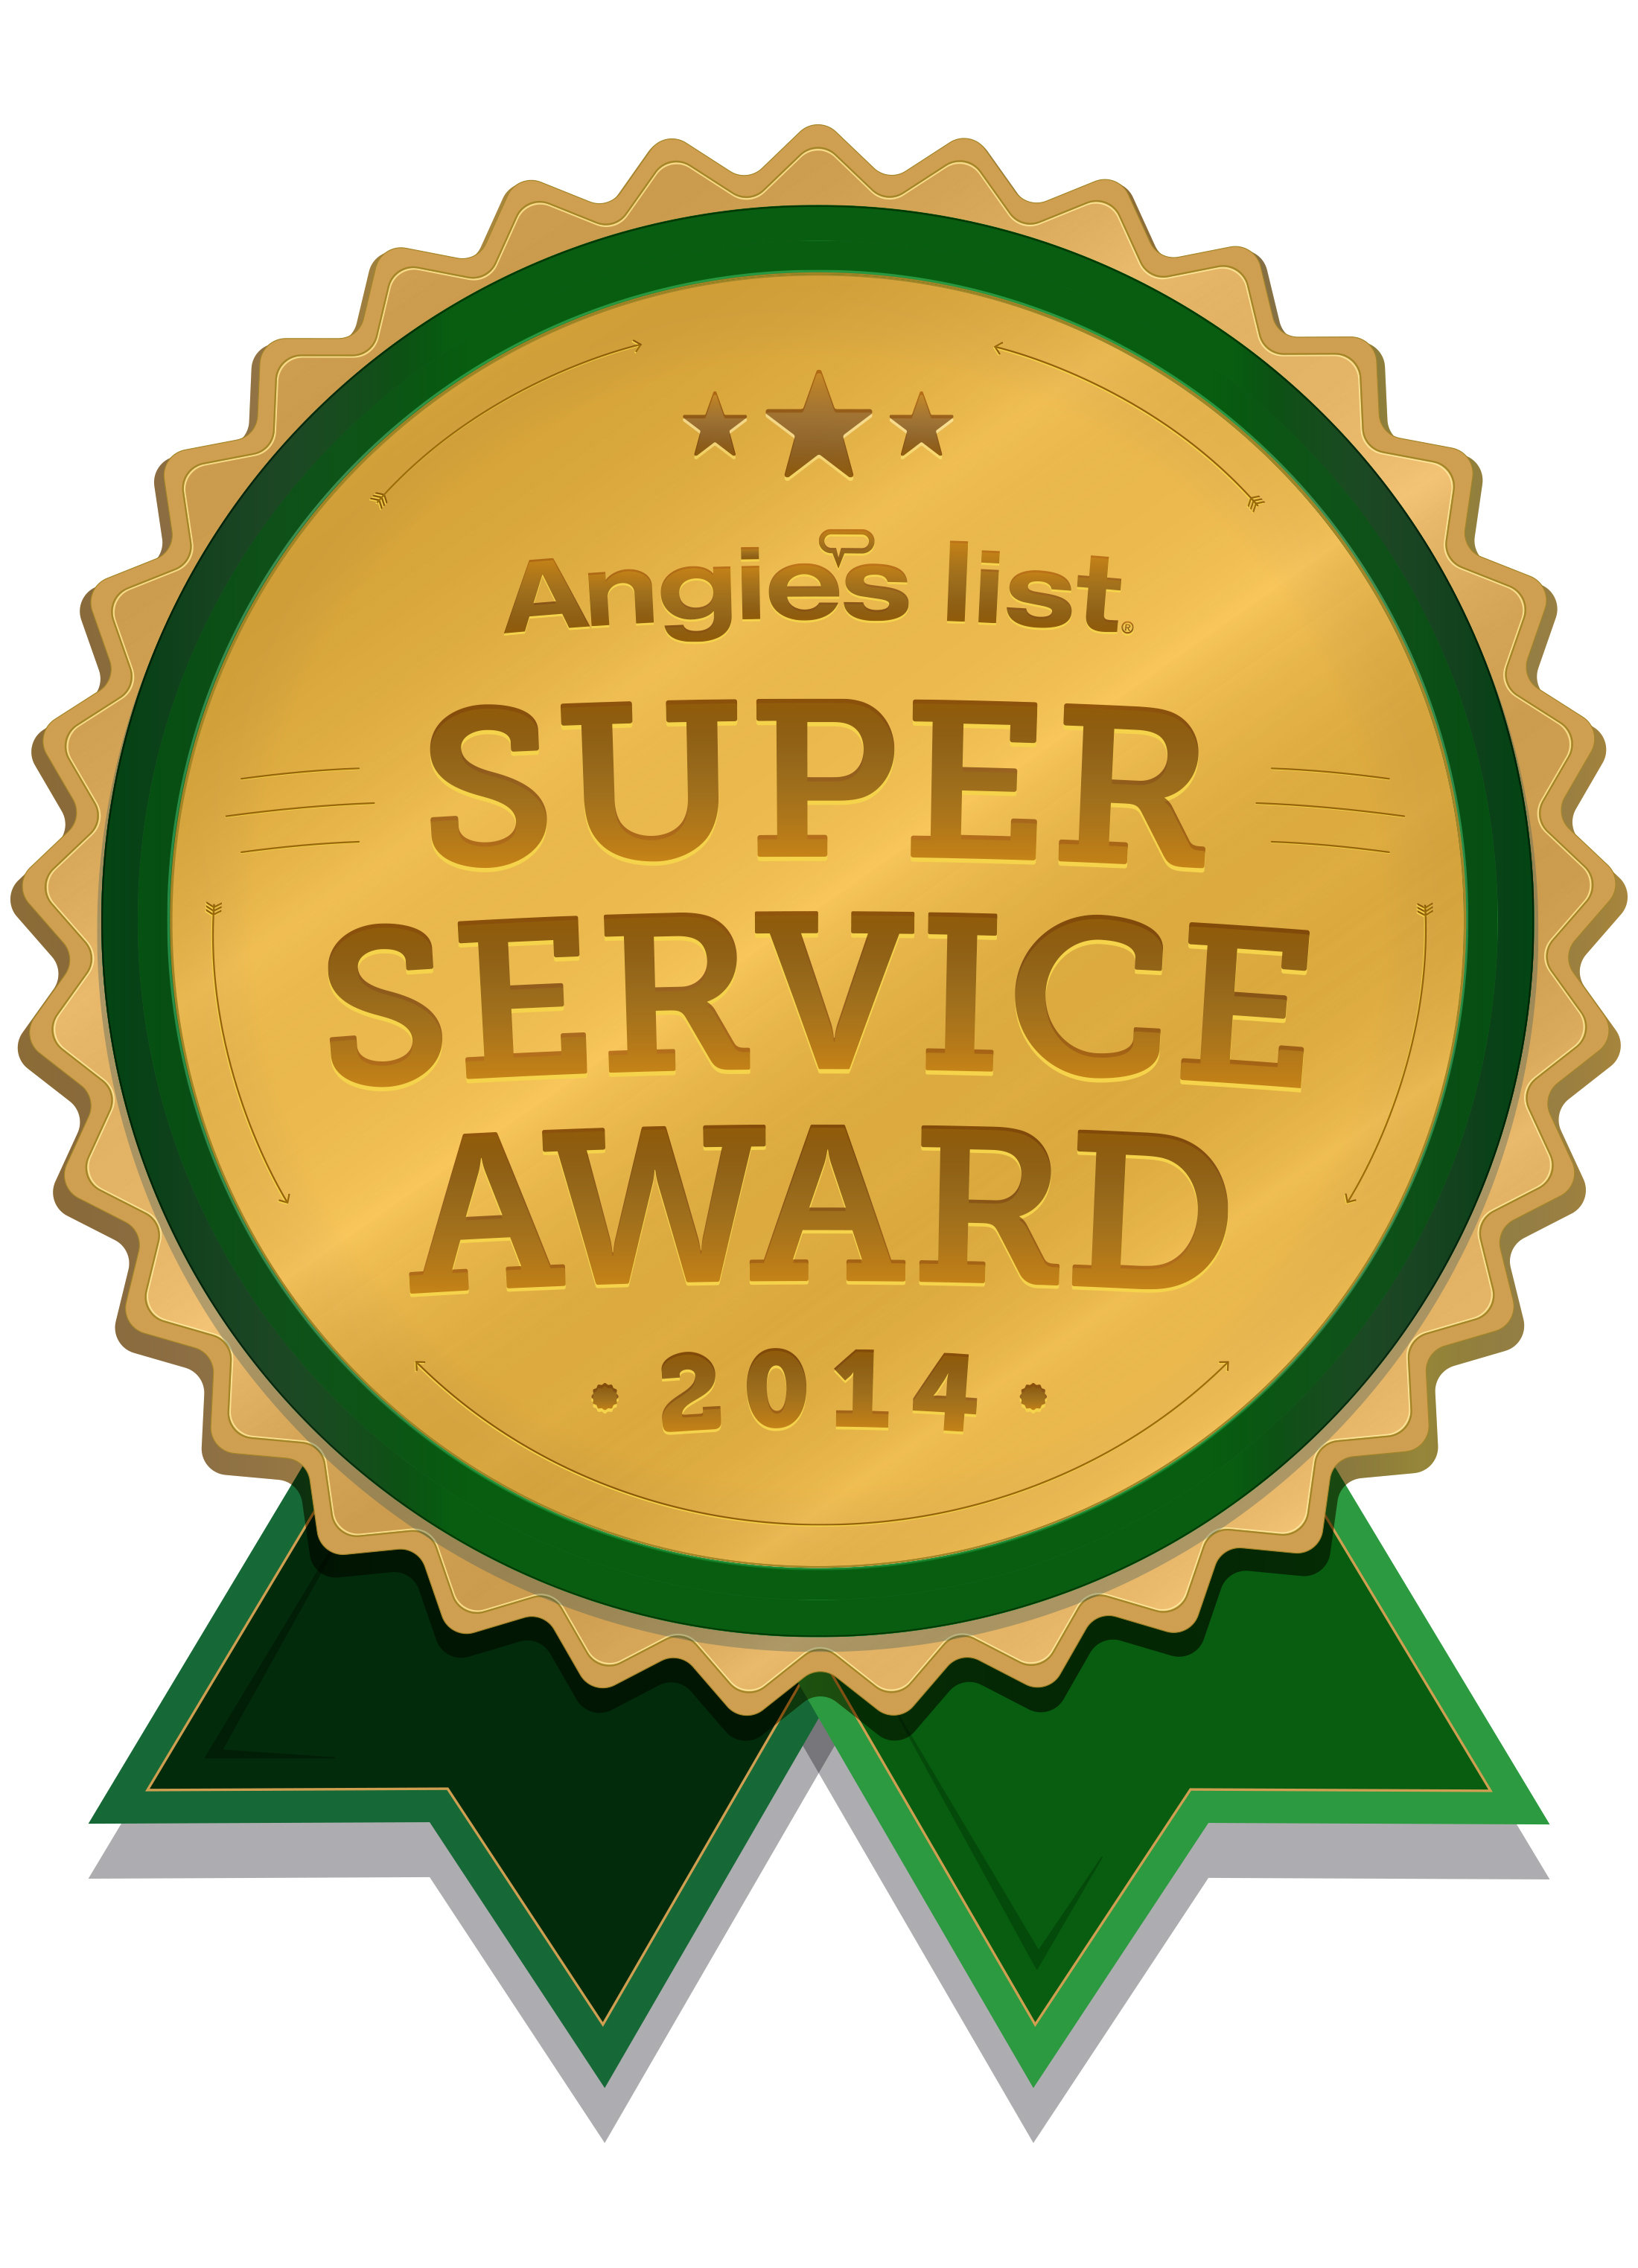 My Smart Security earns Angie's List 2014 prestigious Super Service Award for outstanding customer satisfaction.